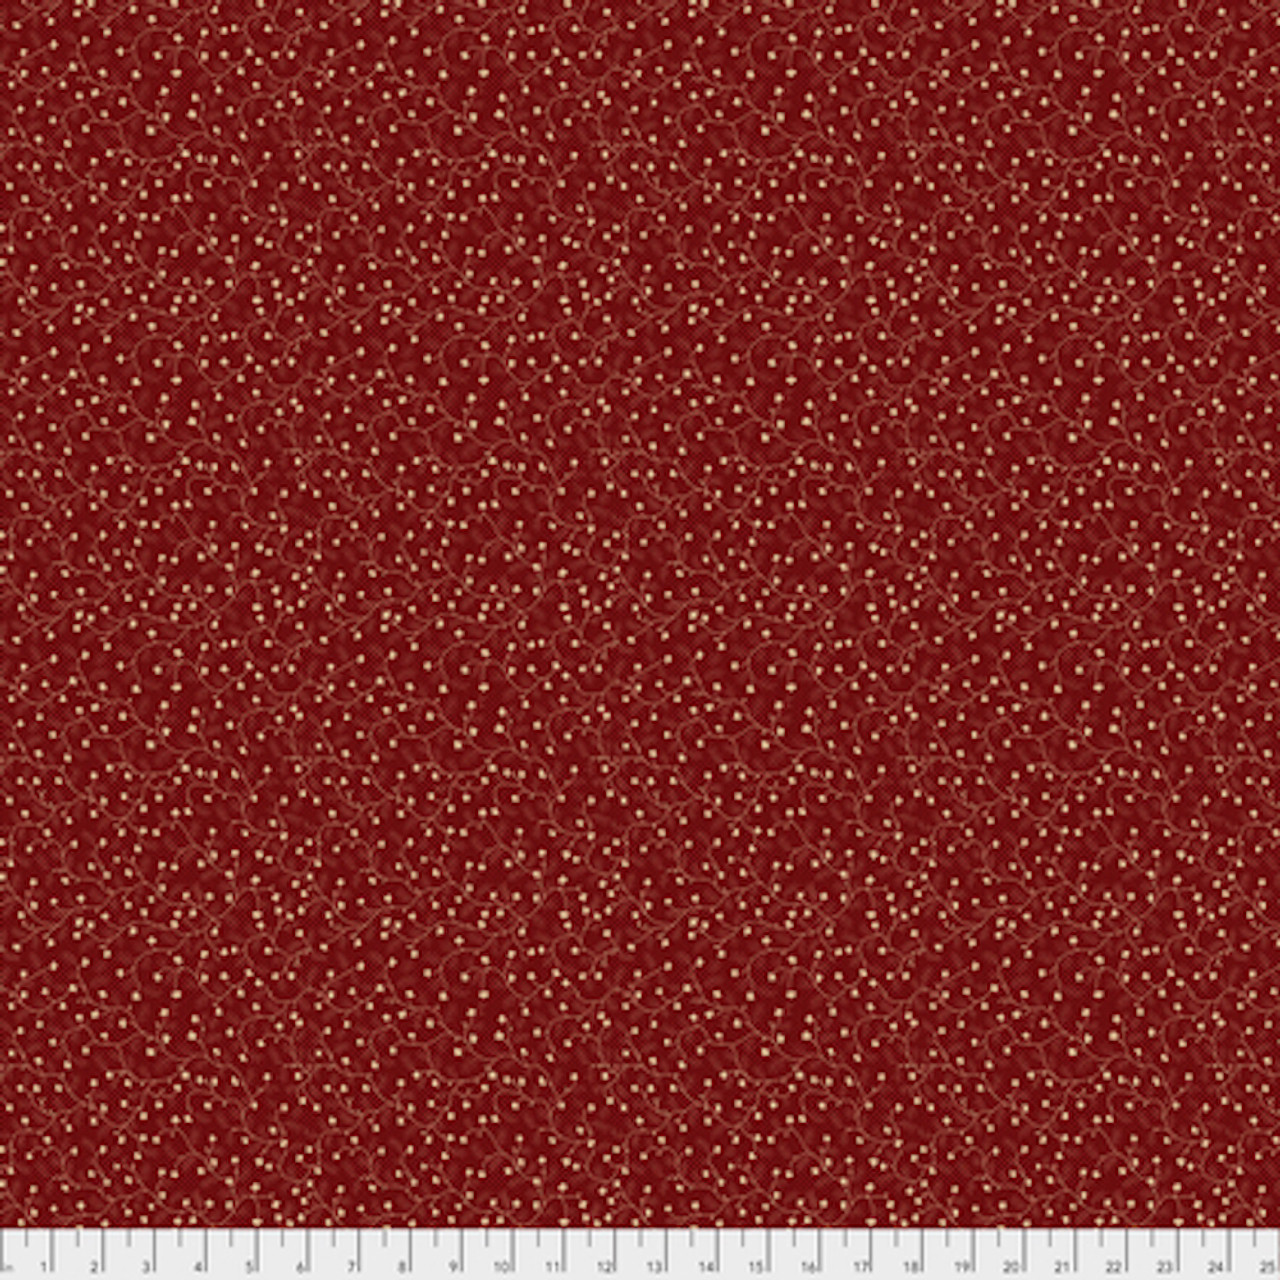 Free Spirit Boston Commons PWFS038 Laurel Red Cotton Fabric By The Yard